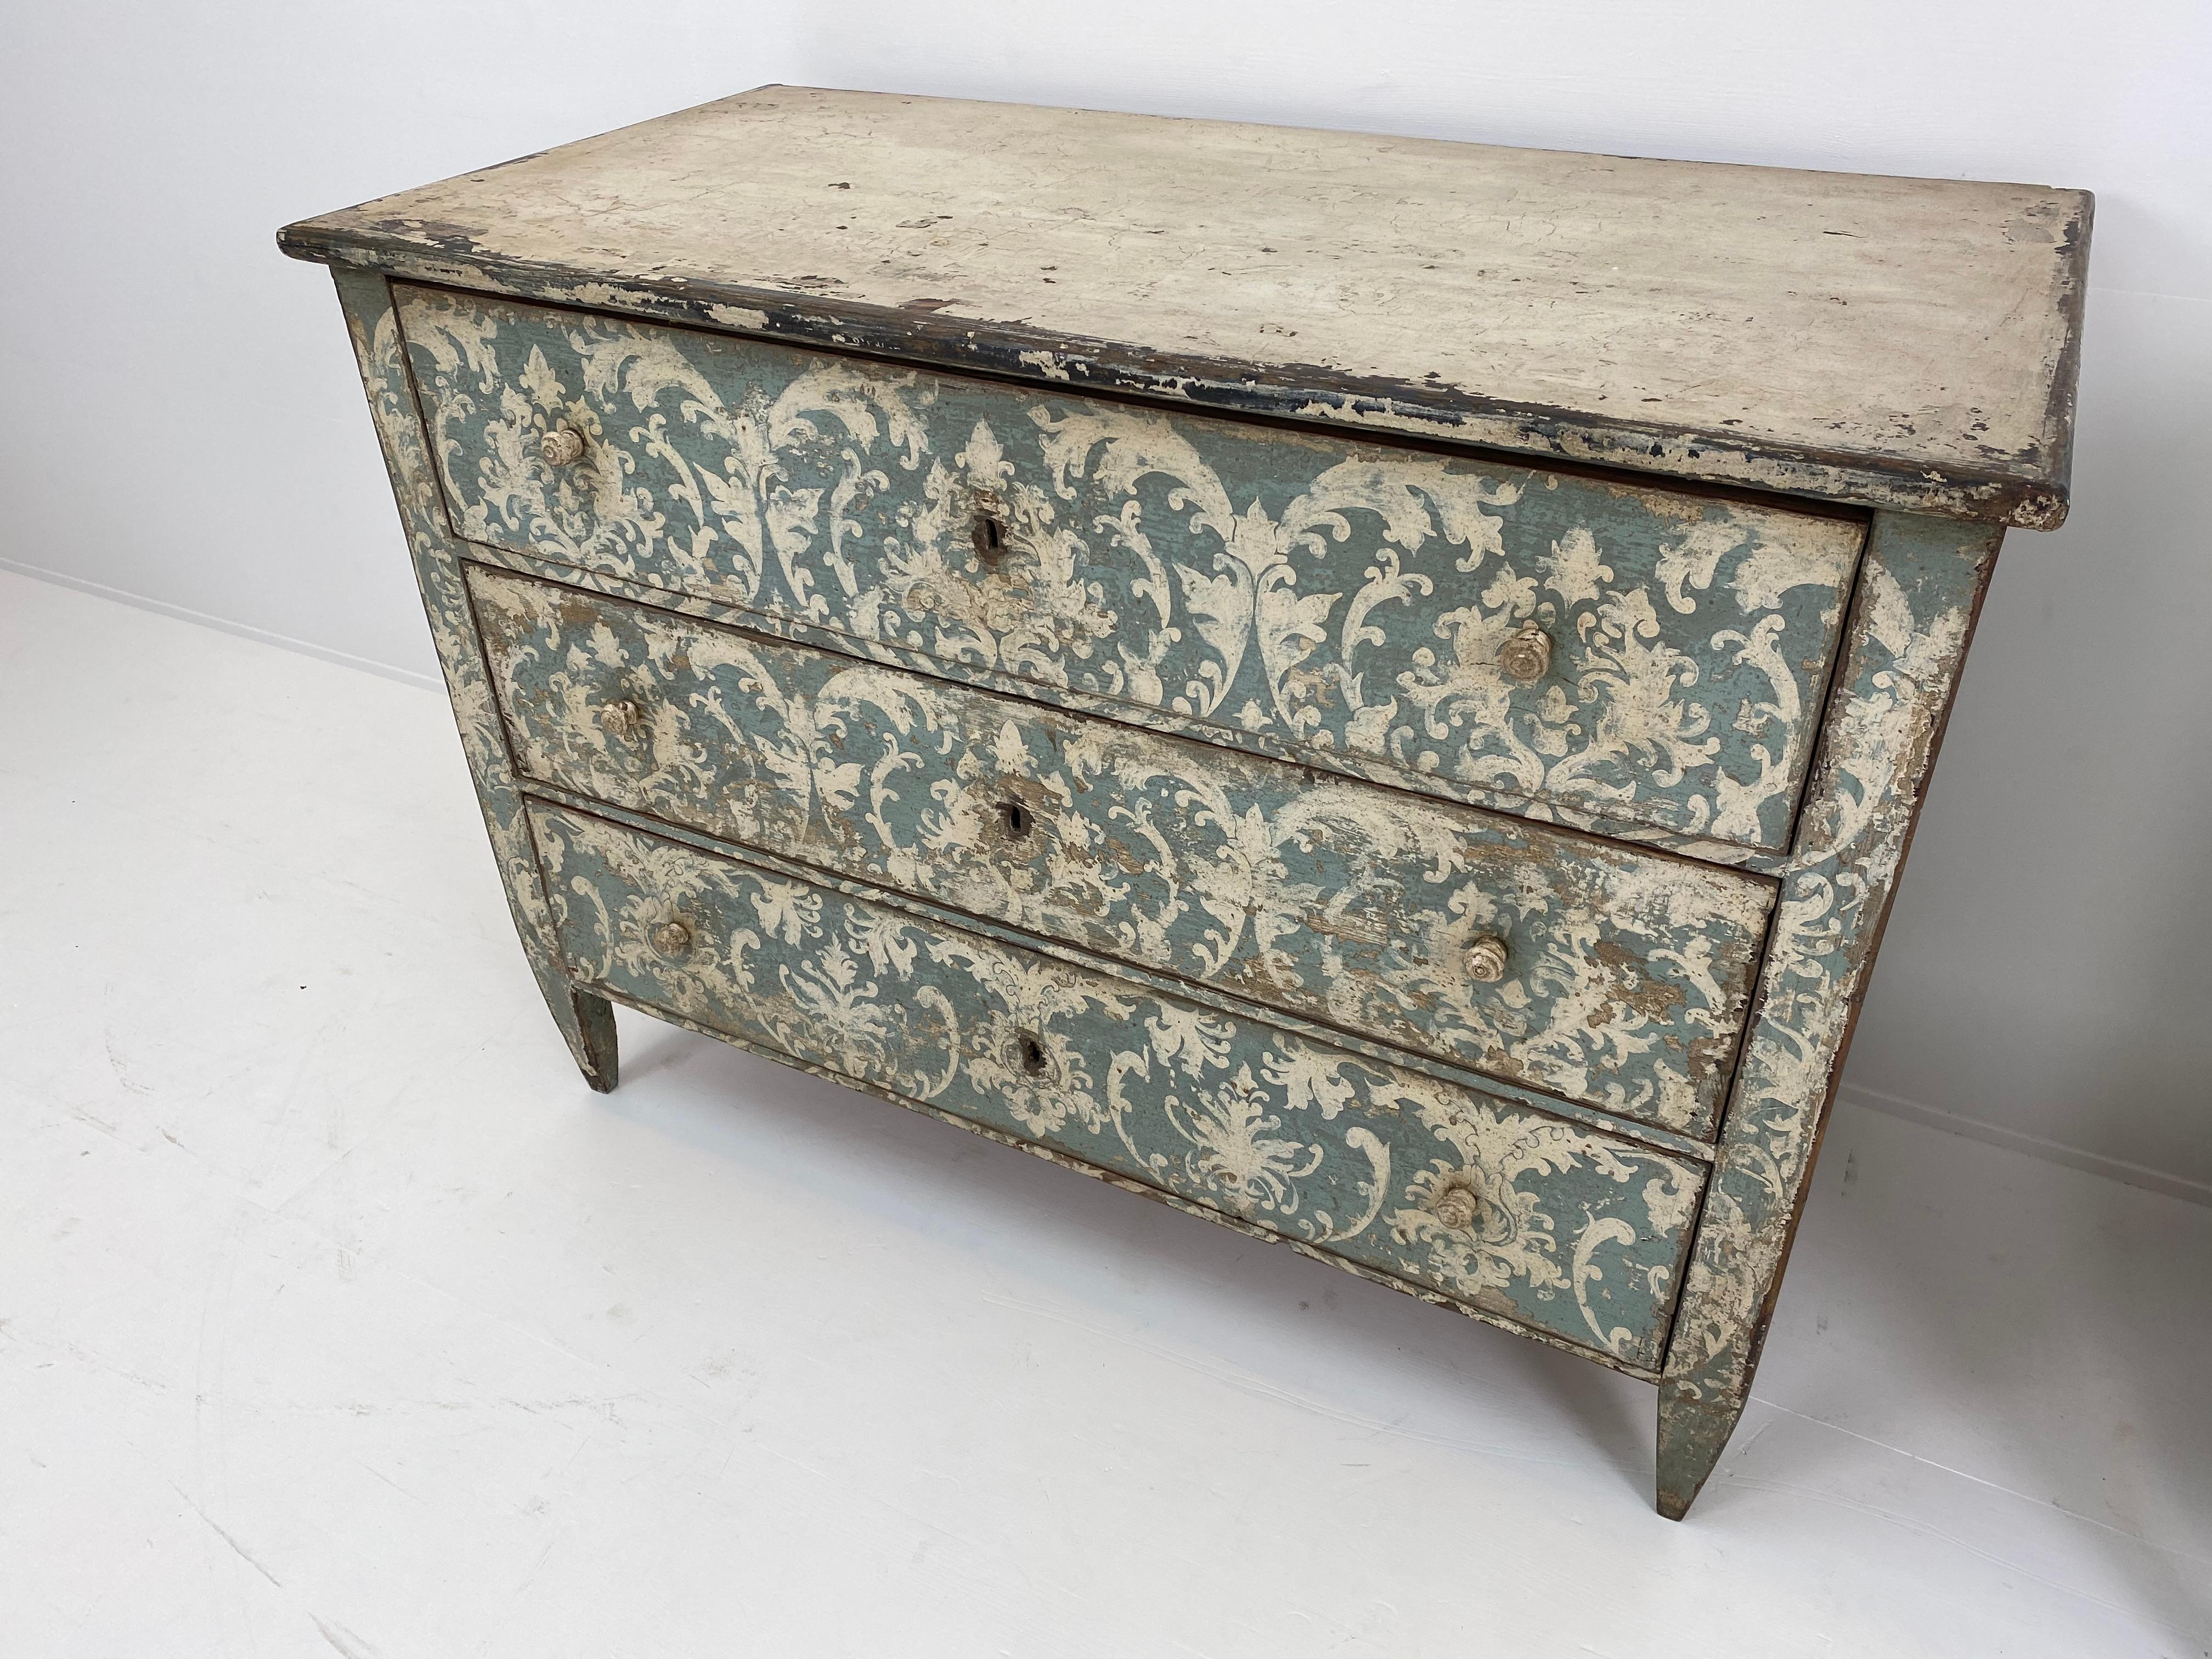 Patinated, Painted pair of Chest of drawers,Spain,
Exceptional pair of Commodes,in painted,patinated Pine
beautiful color combination of blue and beige
wonderfully patinated top and nice legs
great to put in a kitchen or bedroom,
really a lot of